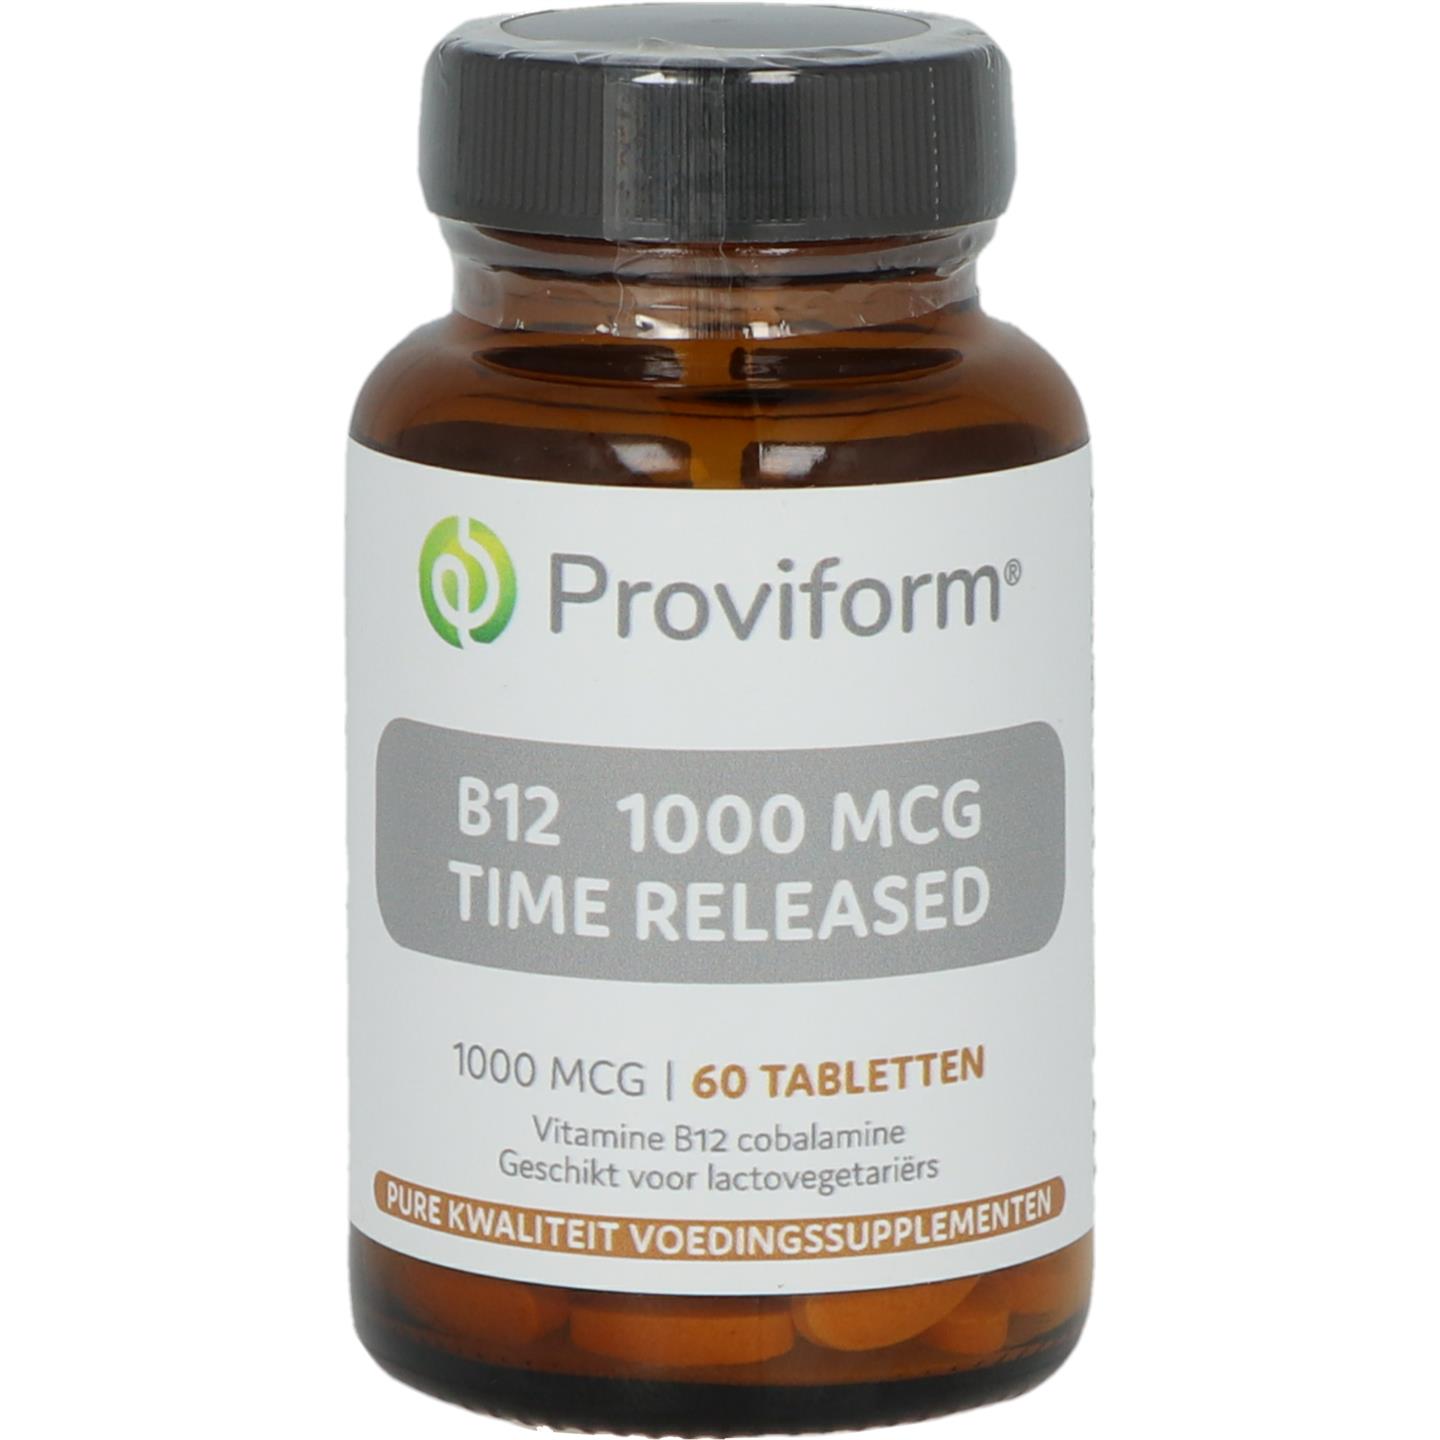 B12 1000 mcg Time Released